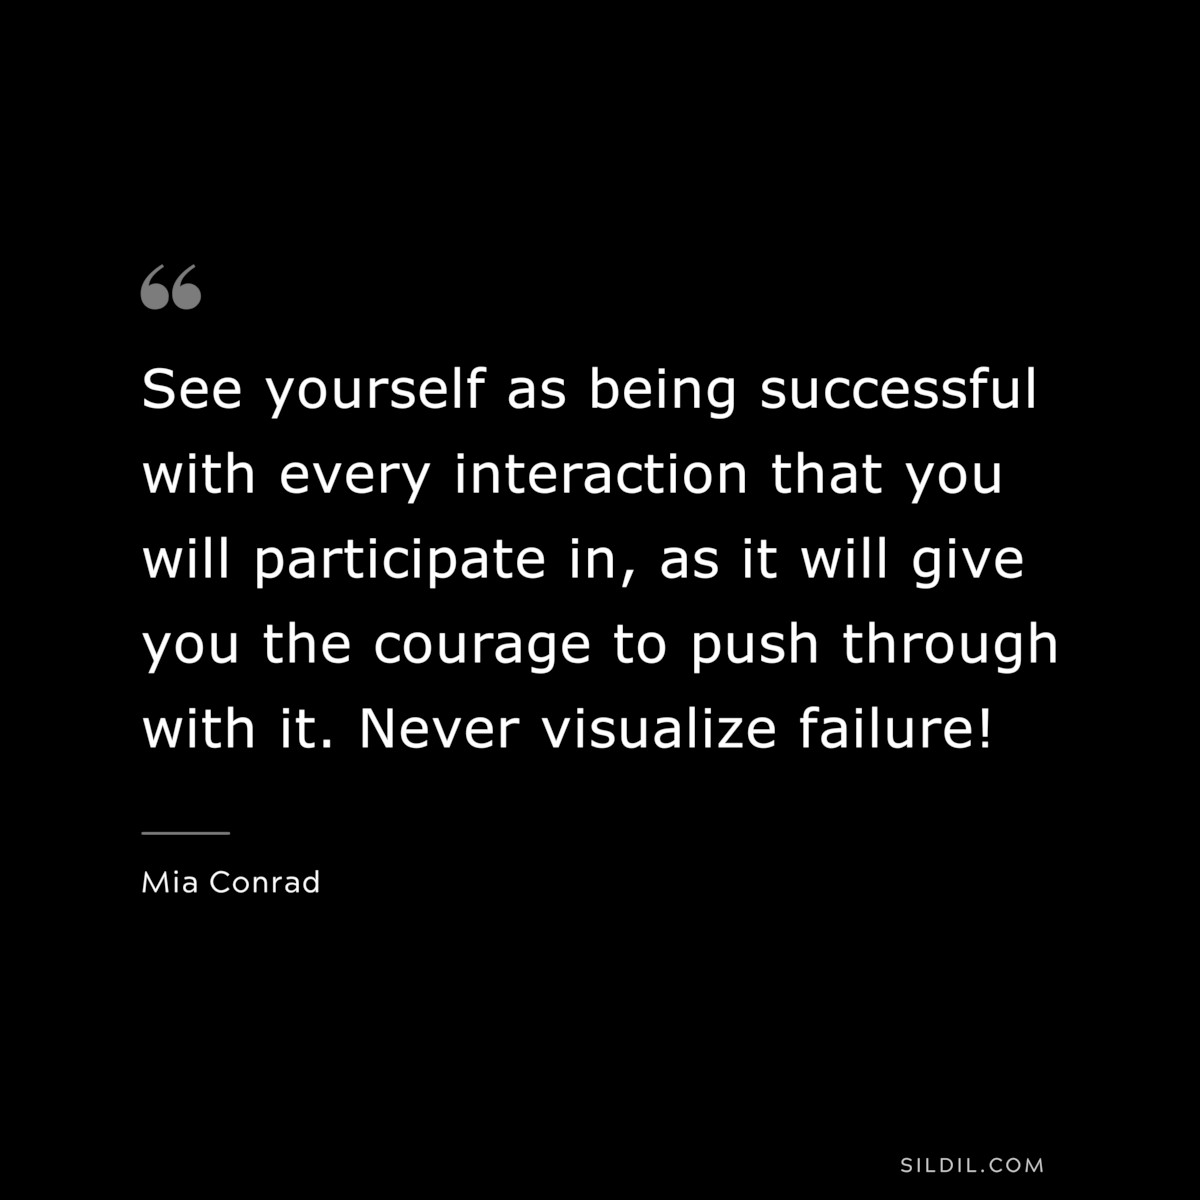 See yourself as being successful with every interaction that you will participate in, as it will give you the courage to push through with it. Never visualize failure! ― Mia Conrad